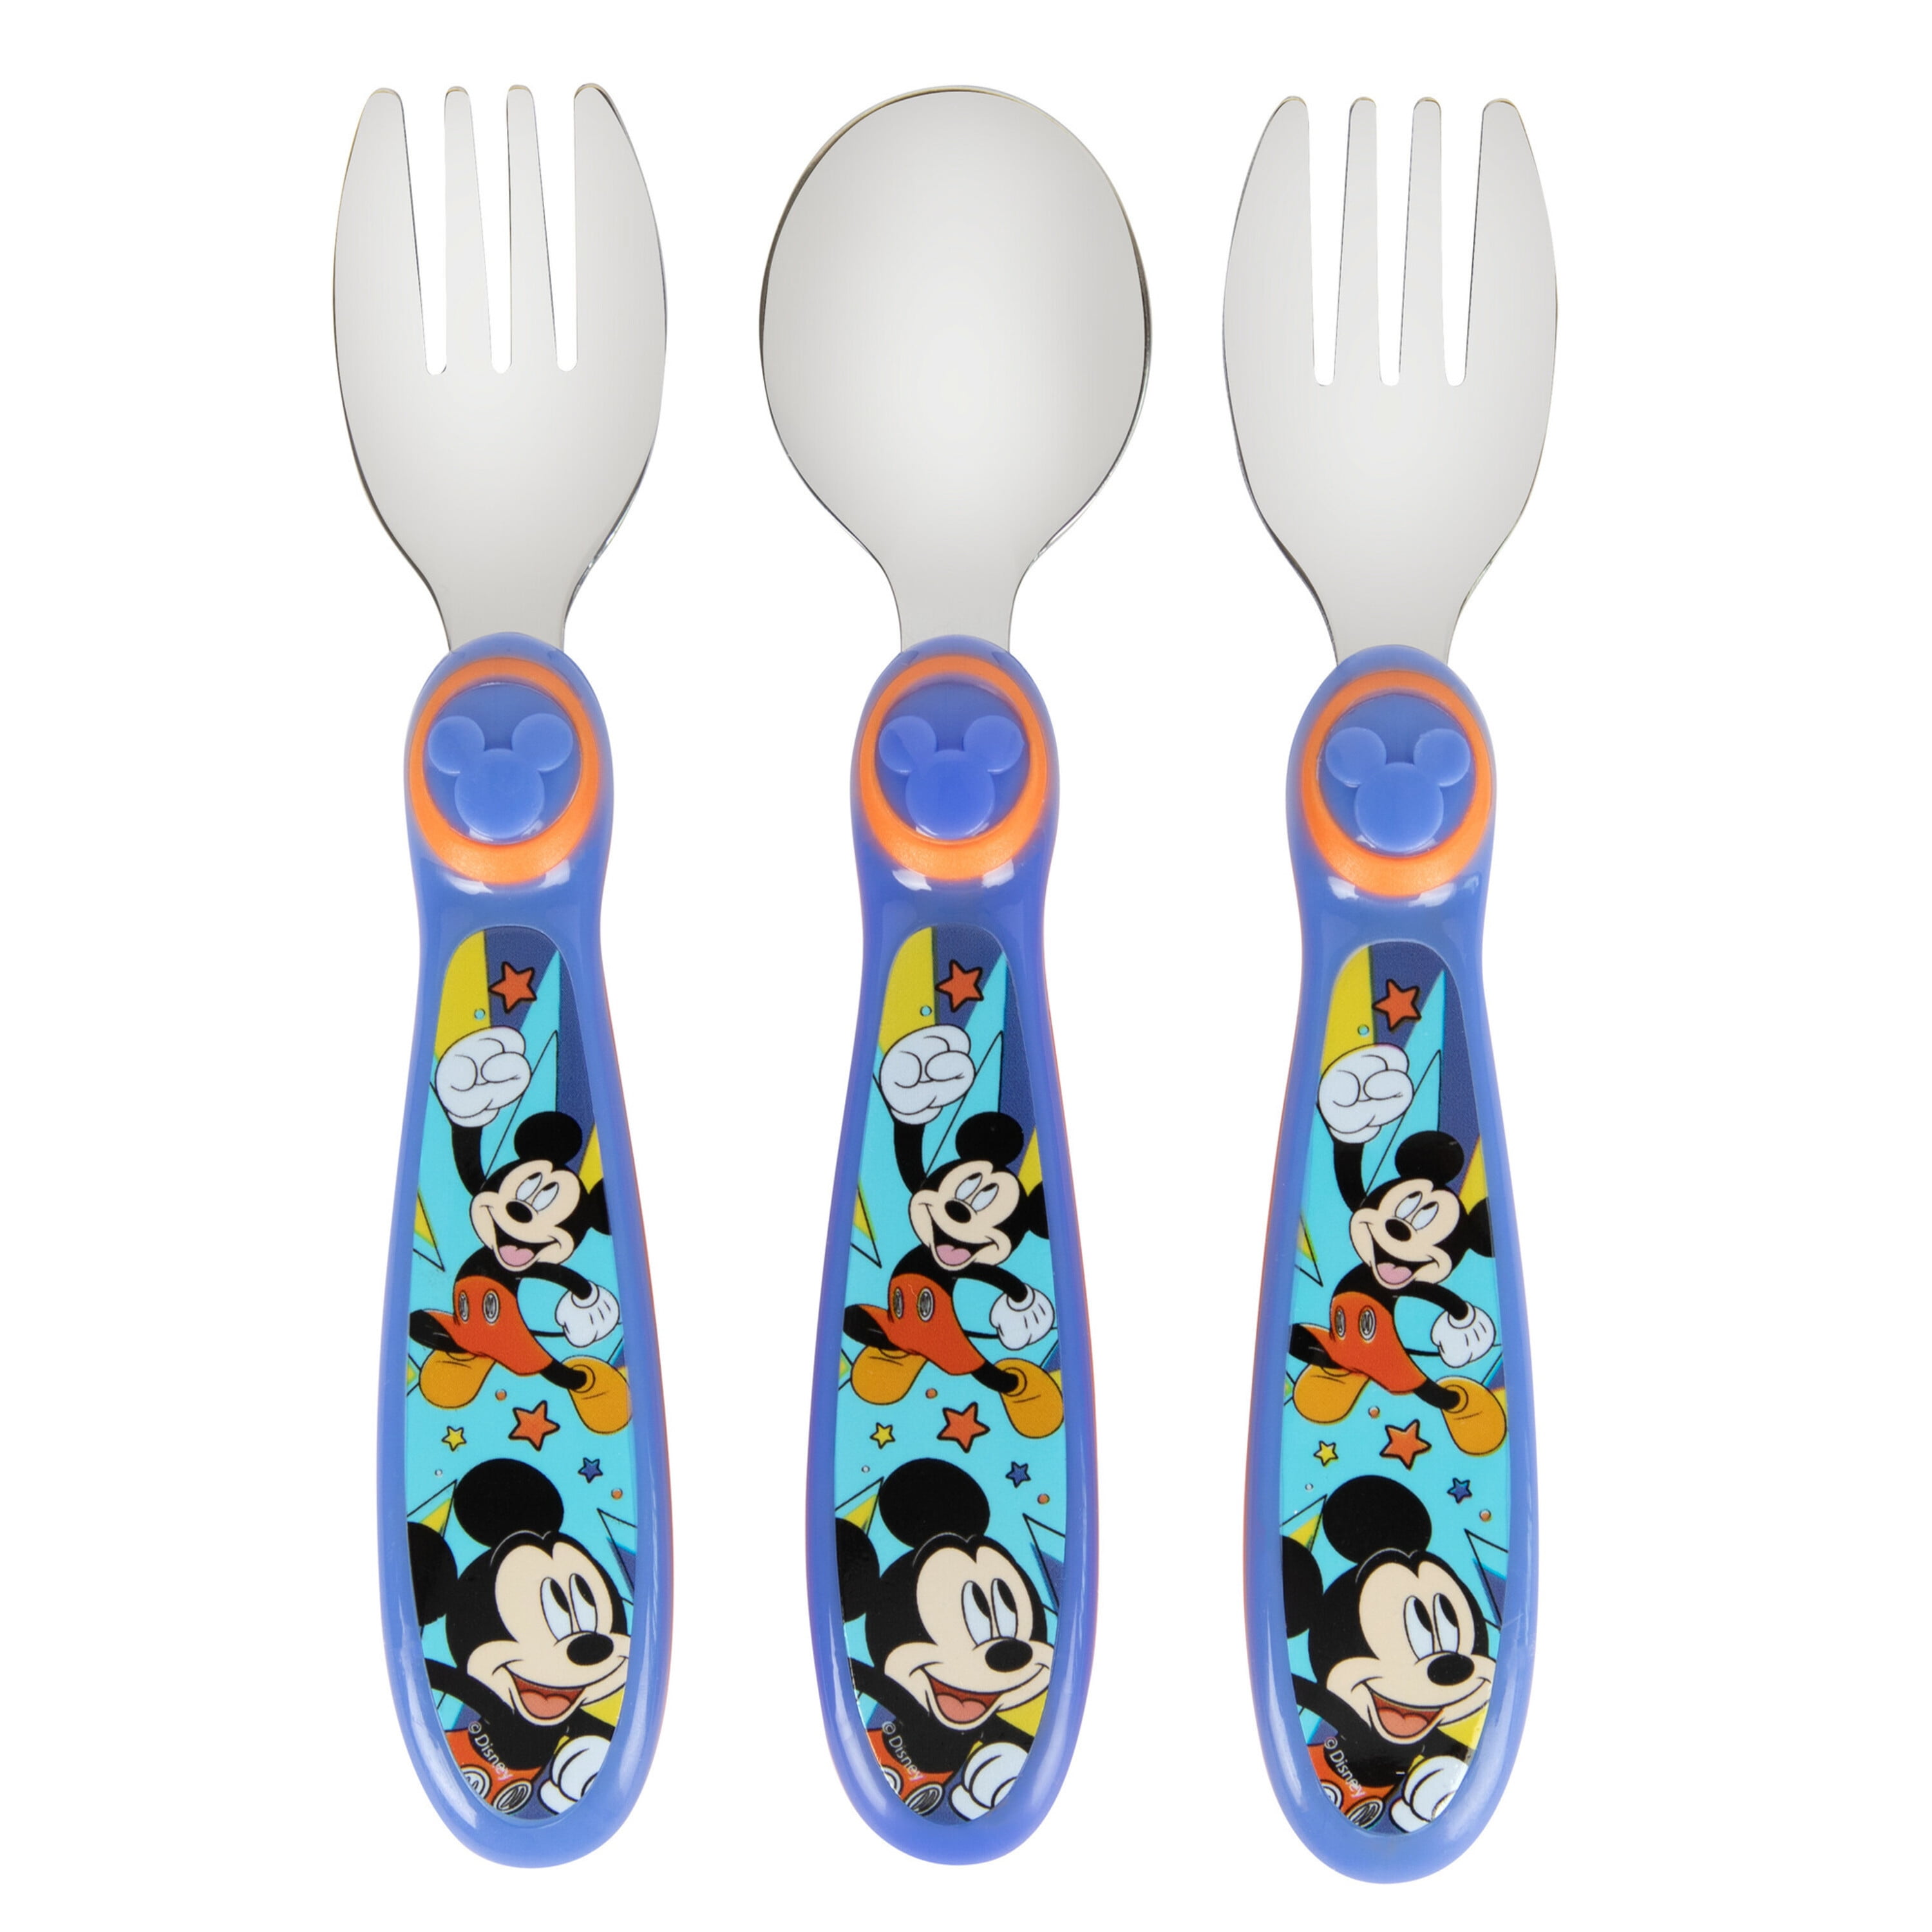 Details about   Disney Store Mickey Mouse Cutlery Set of 12 Summer Fun New in Box show original title 